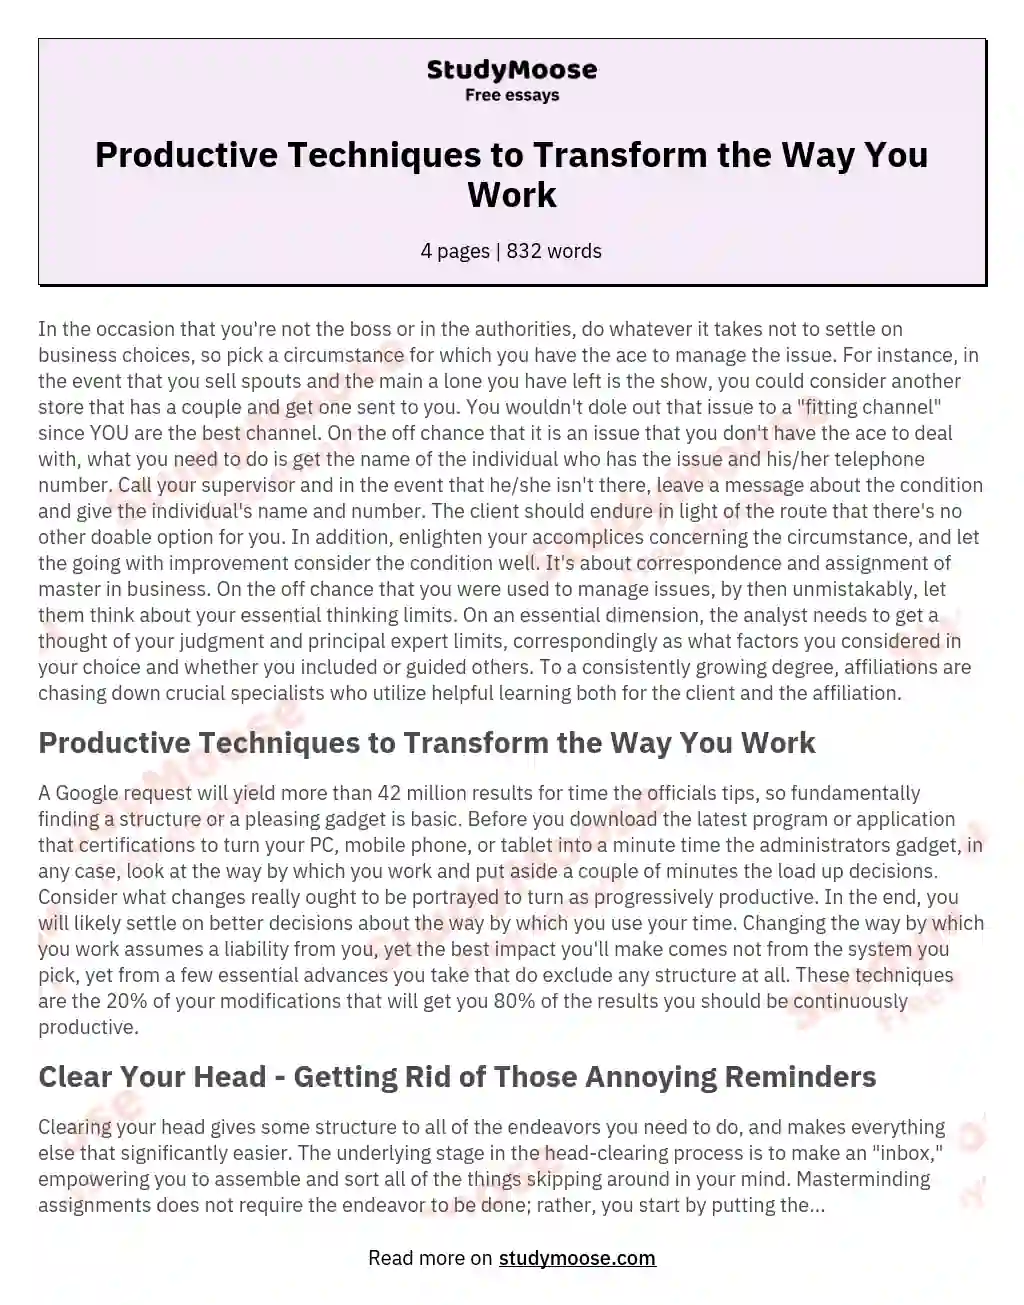 Productive Techniques to Transform the Way You Work